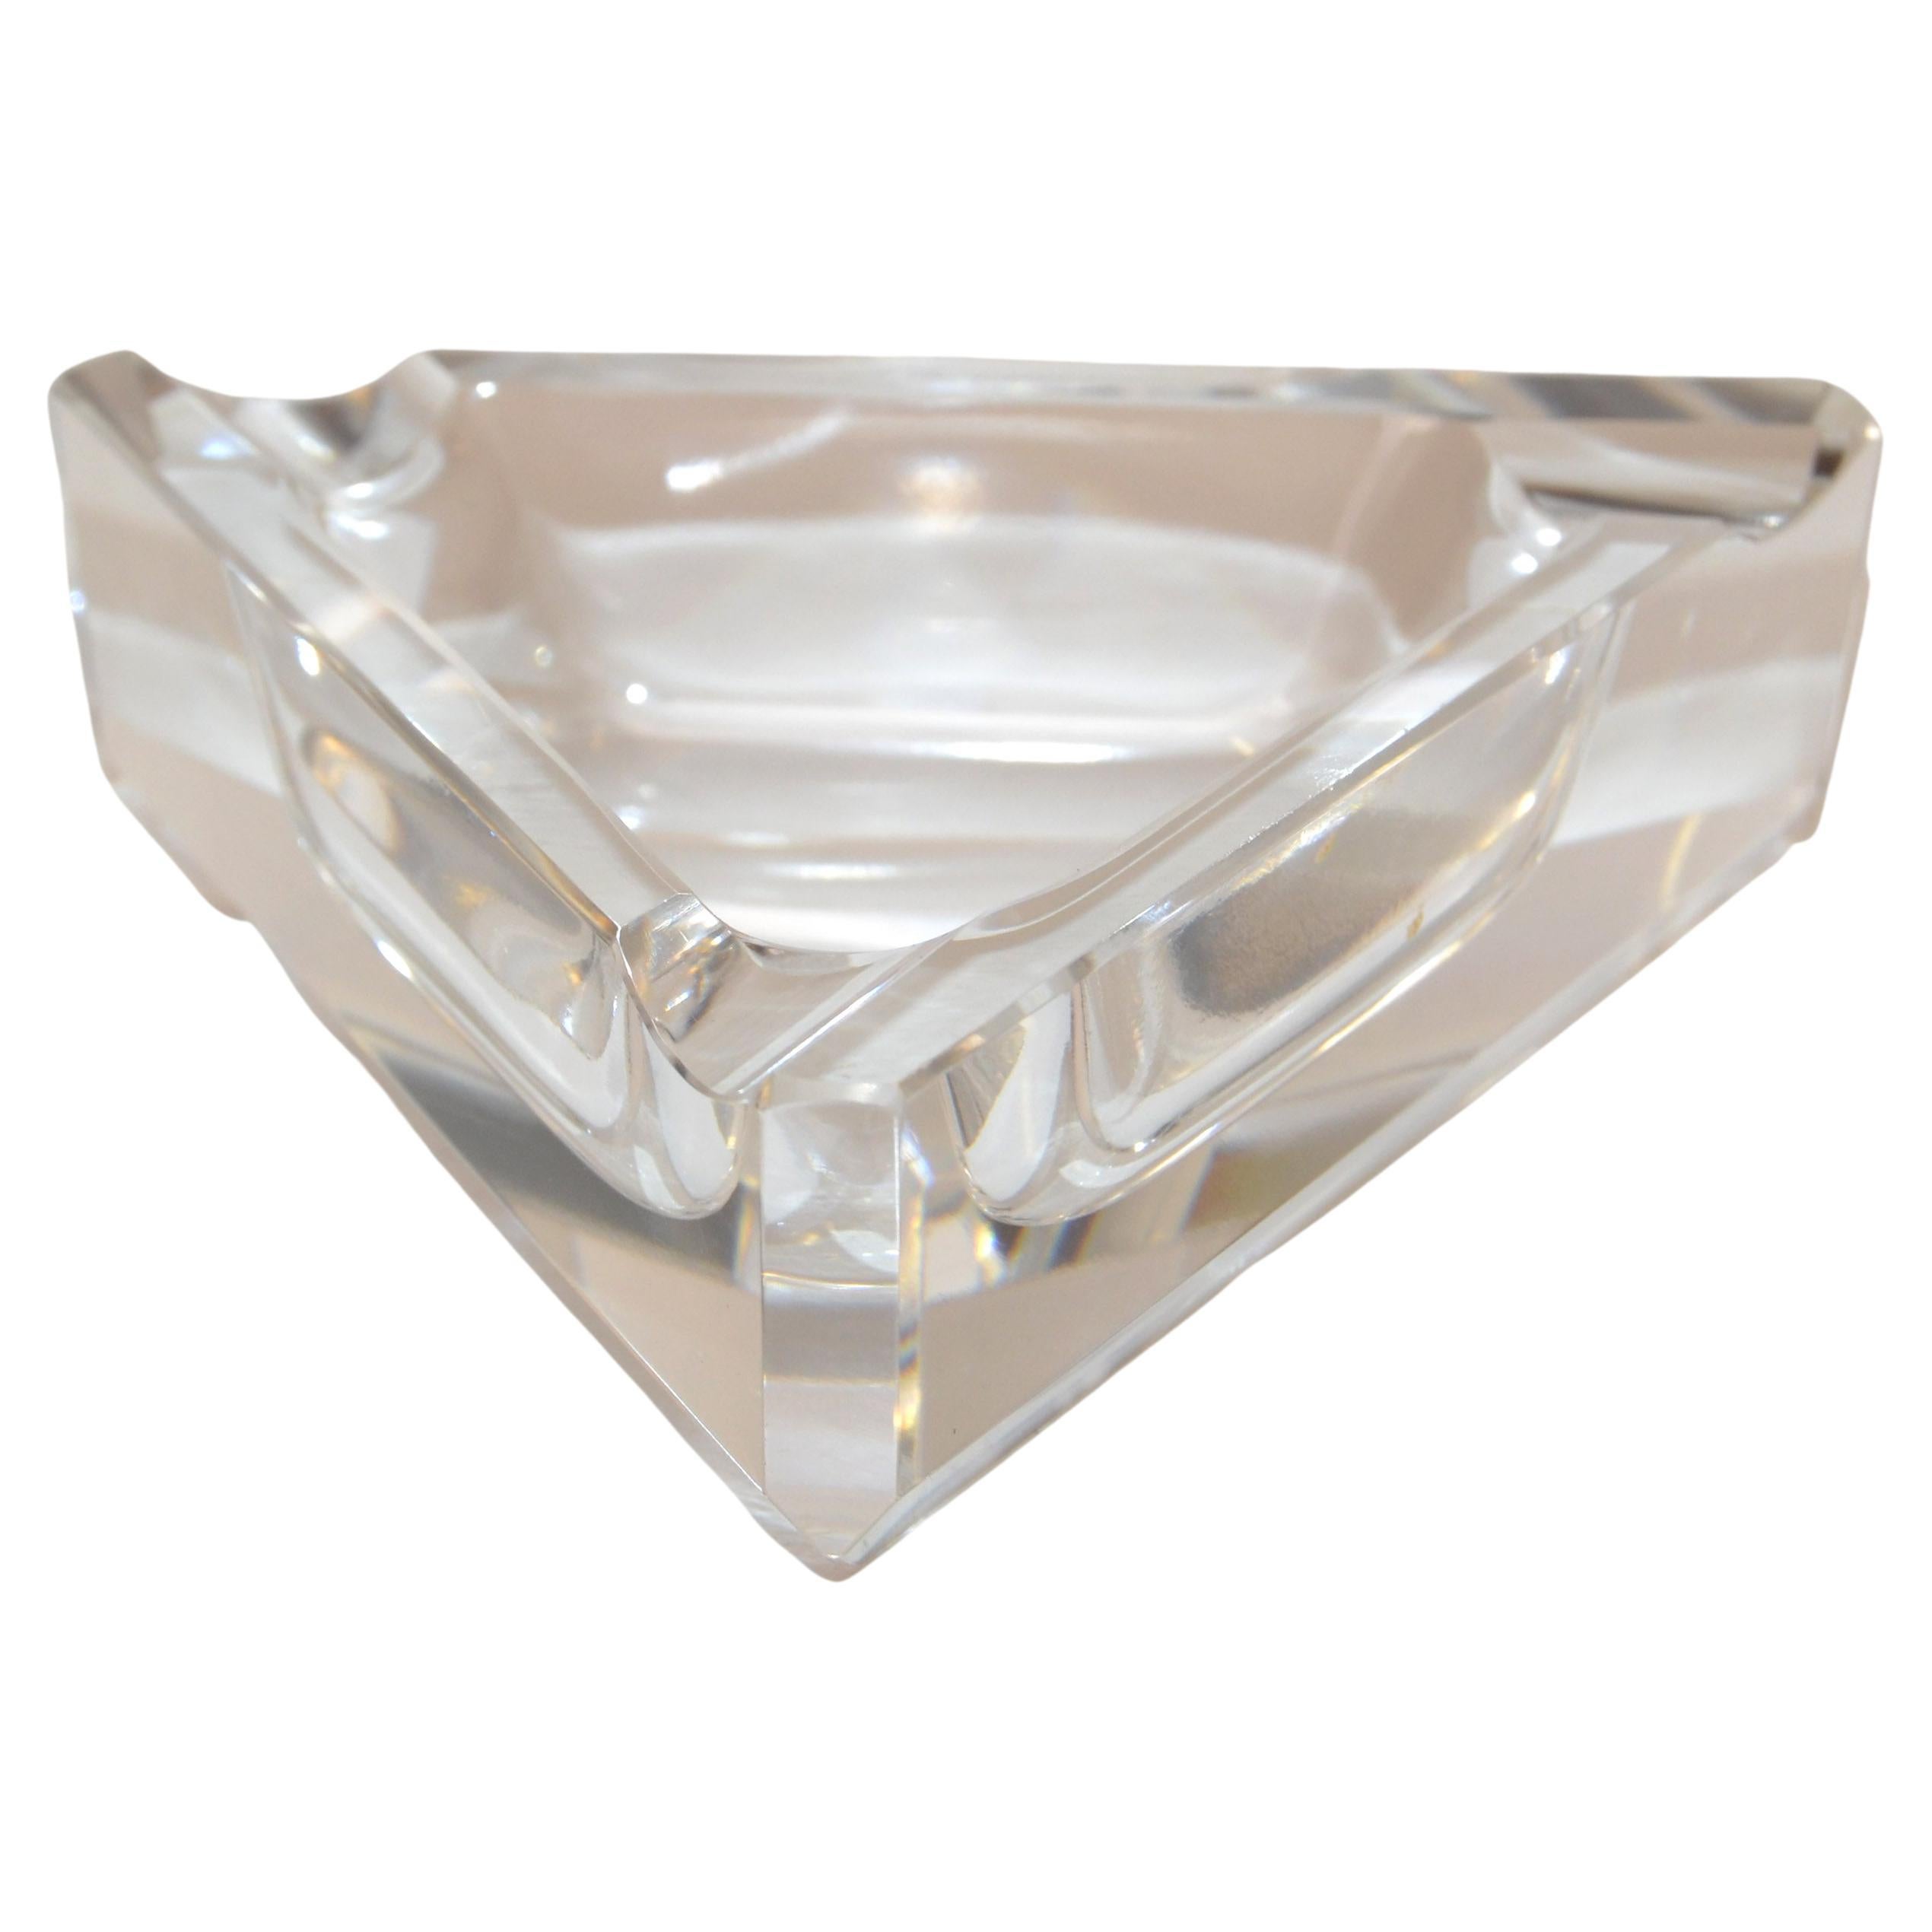 Ceska Bohemian Crystal Art Deco hand-crafted faceted geometric Triangle Ashtray.
This beautiful piece is cut crystal with beautiful cut facets to create prisms of color when light passes through it. The Ashtray was produced during in the late 20th